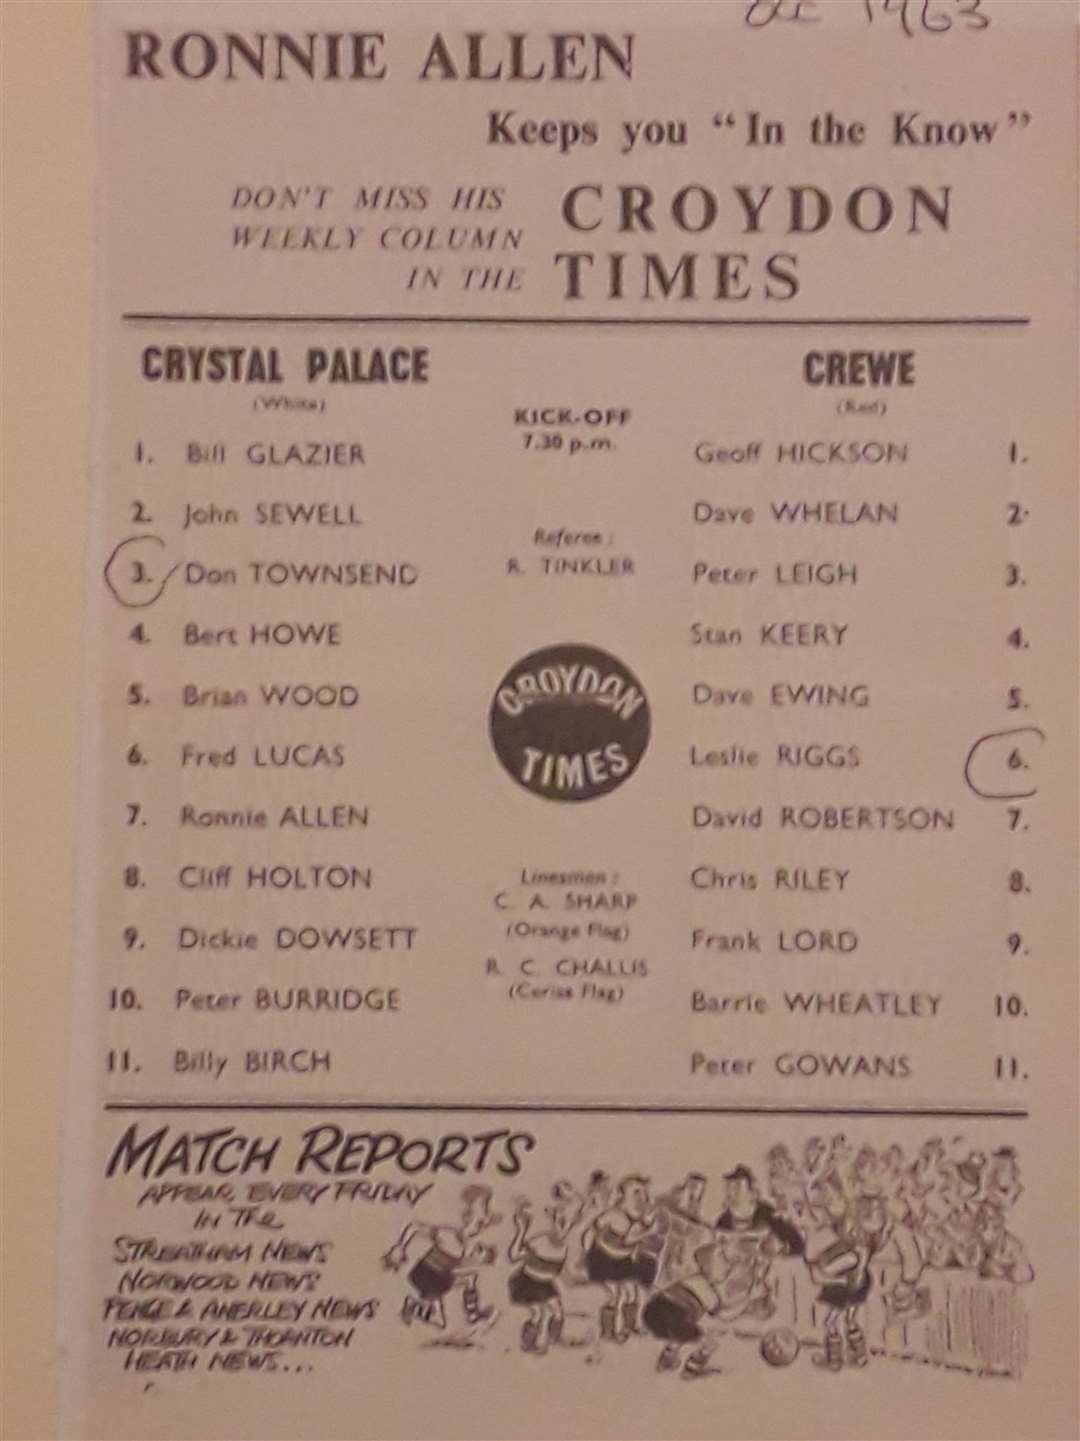 Don Townsend and Les Riggs were named on opposite teams in the matchday programme